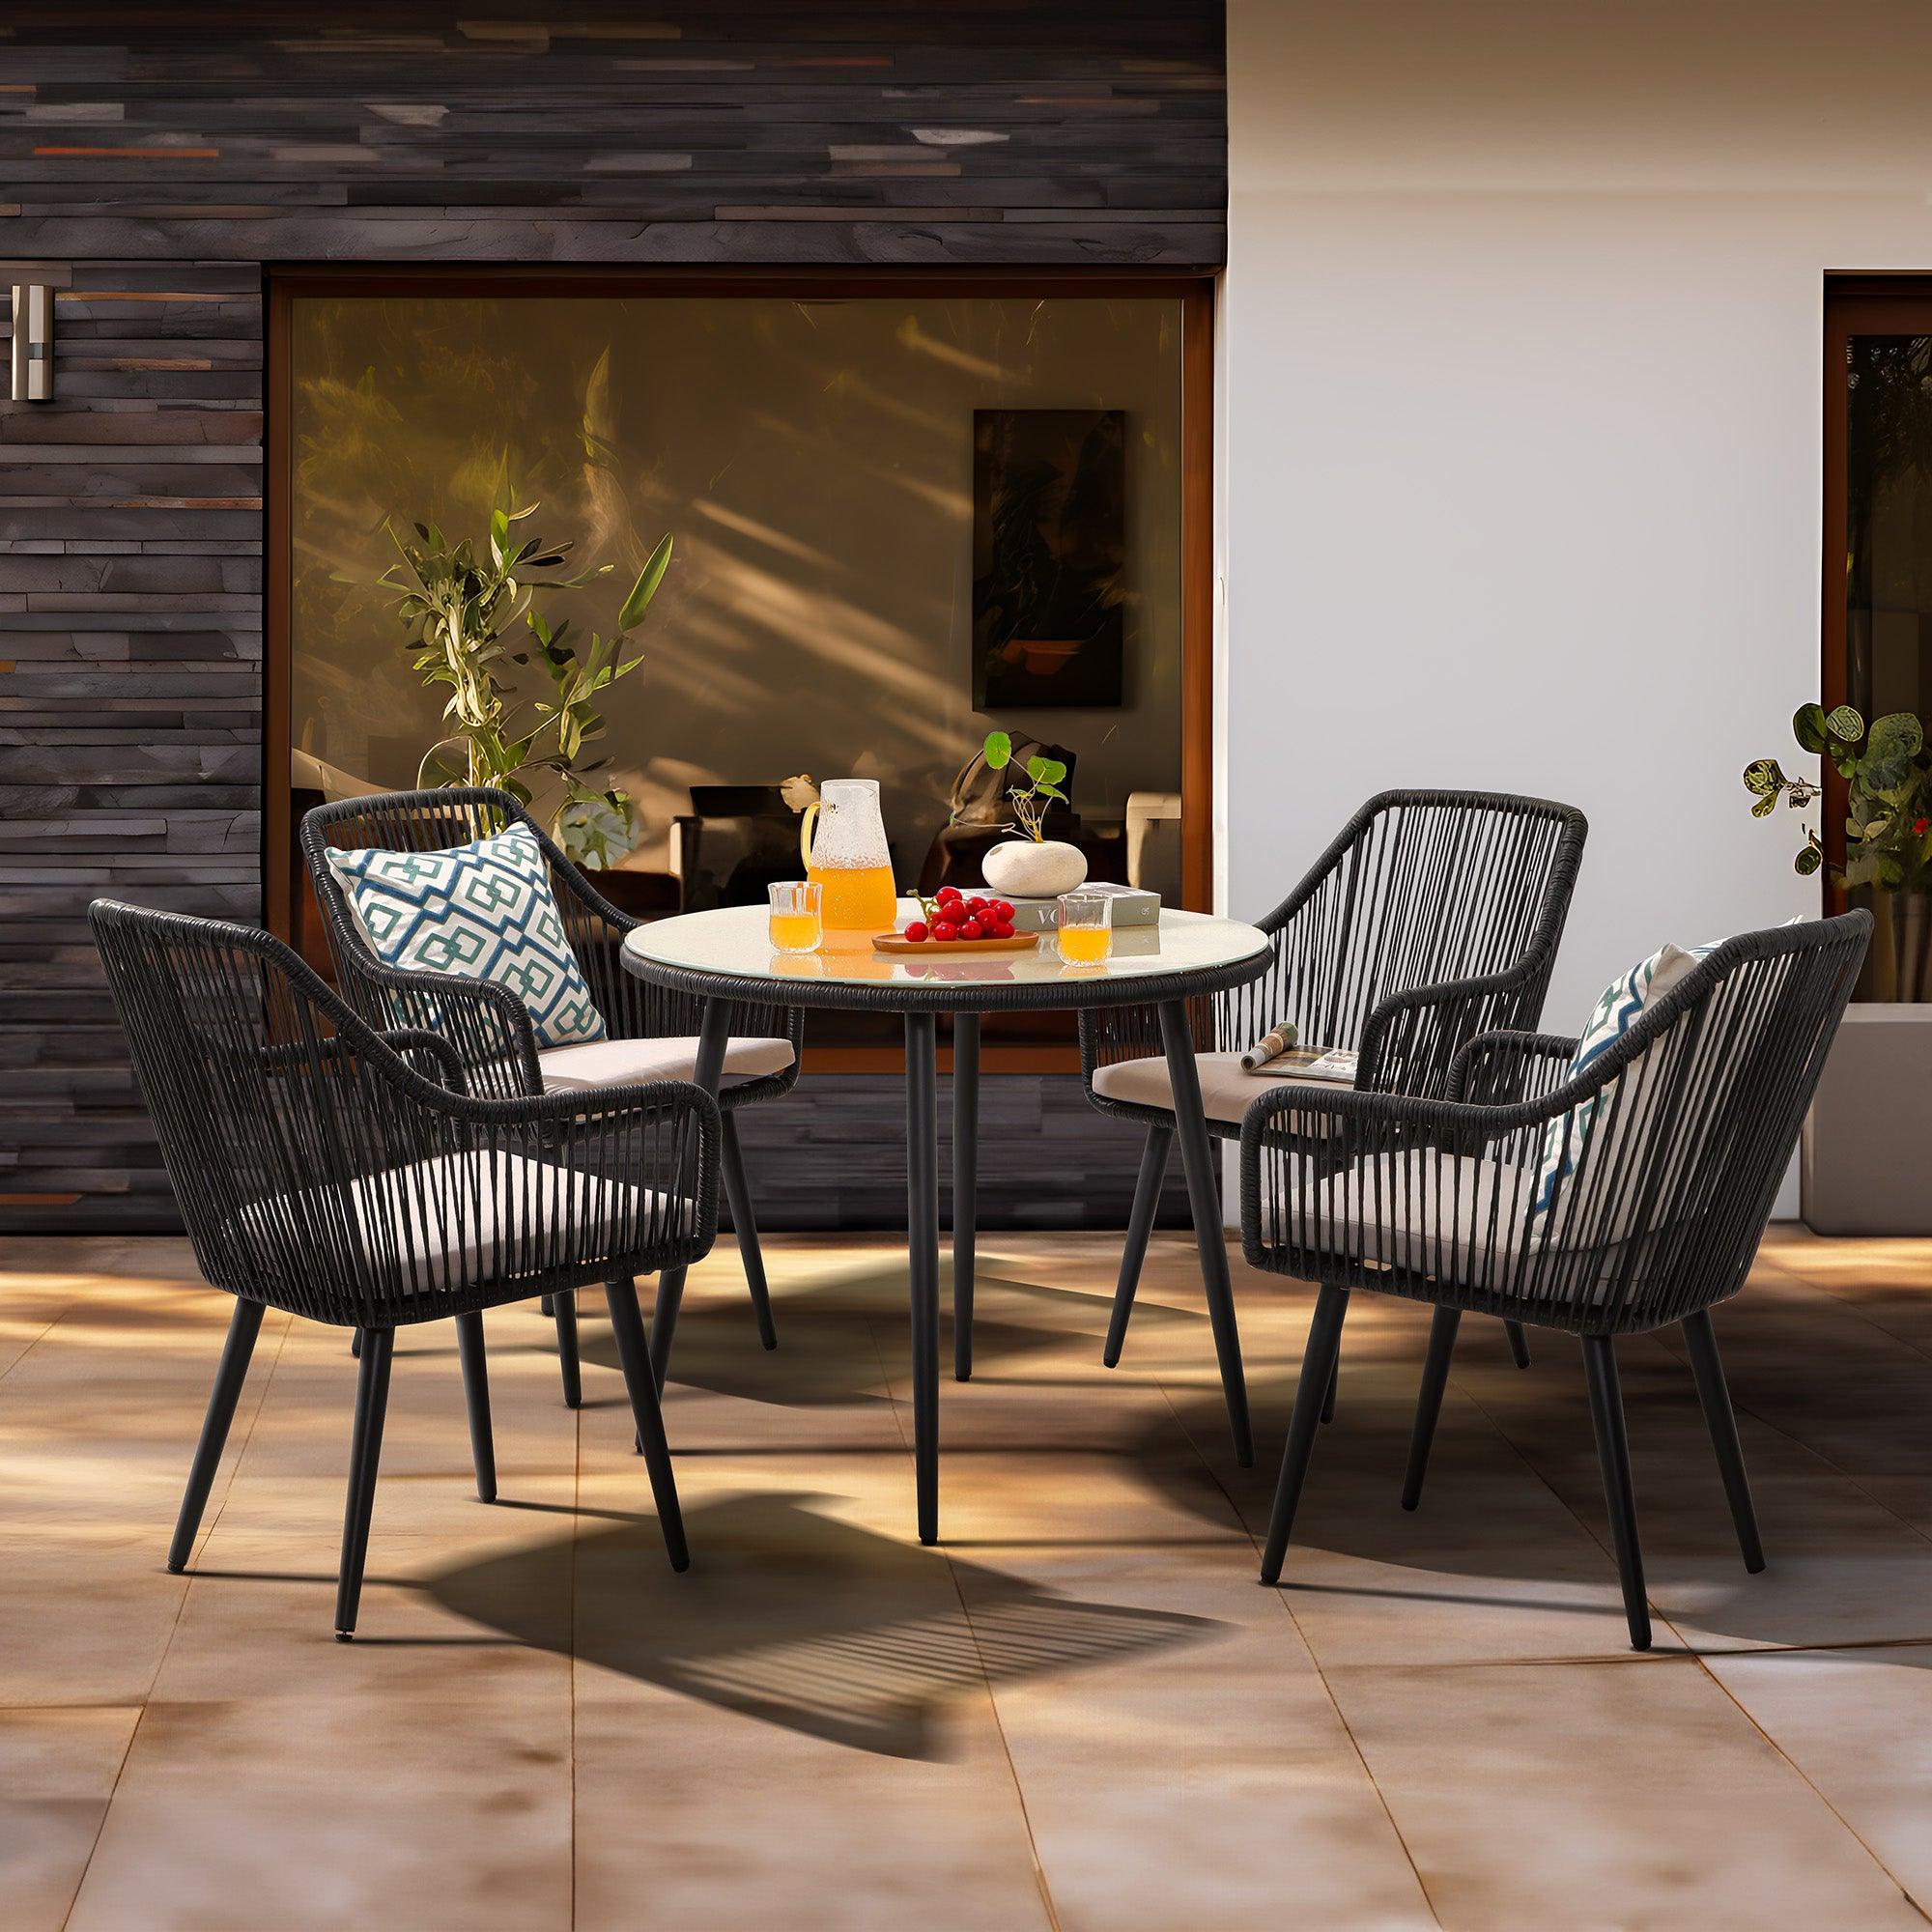 Hallerbos Modern Wicker Outdoor Furniture, black rattan outdoor Dining Set for 4 with steel frame, 1 Round Dining Table with umbrella hole, 4 dining chairs with beige cushions- Jardina Furniture#Color_Black